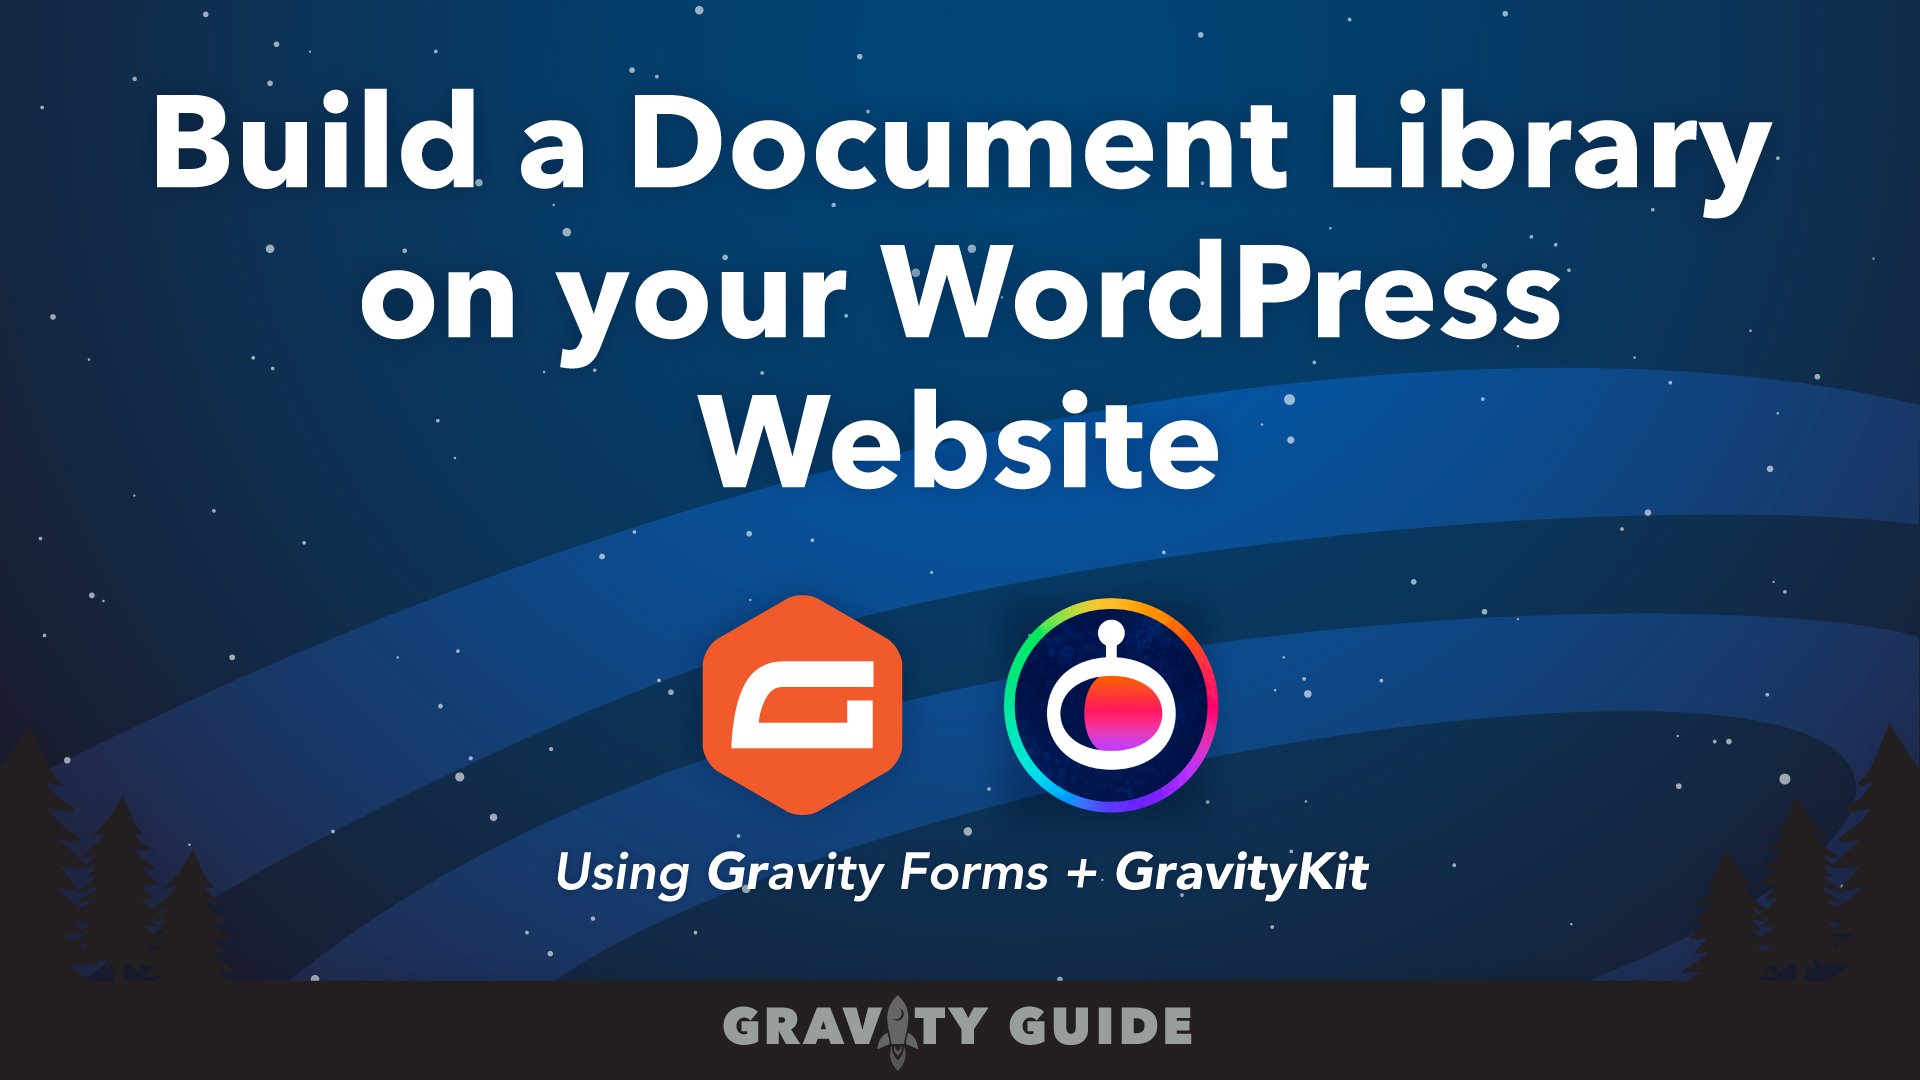 Build a Document Library on Your WordPress Website